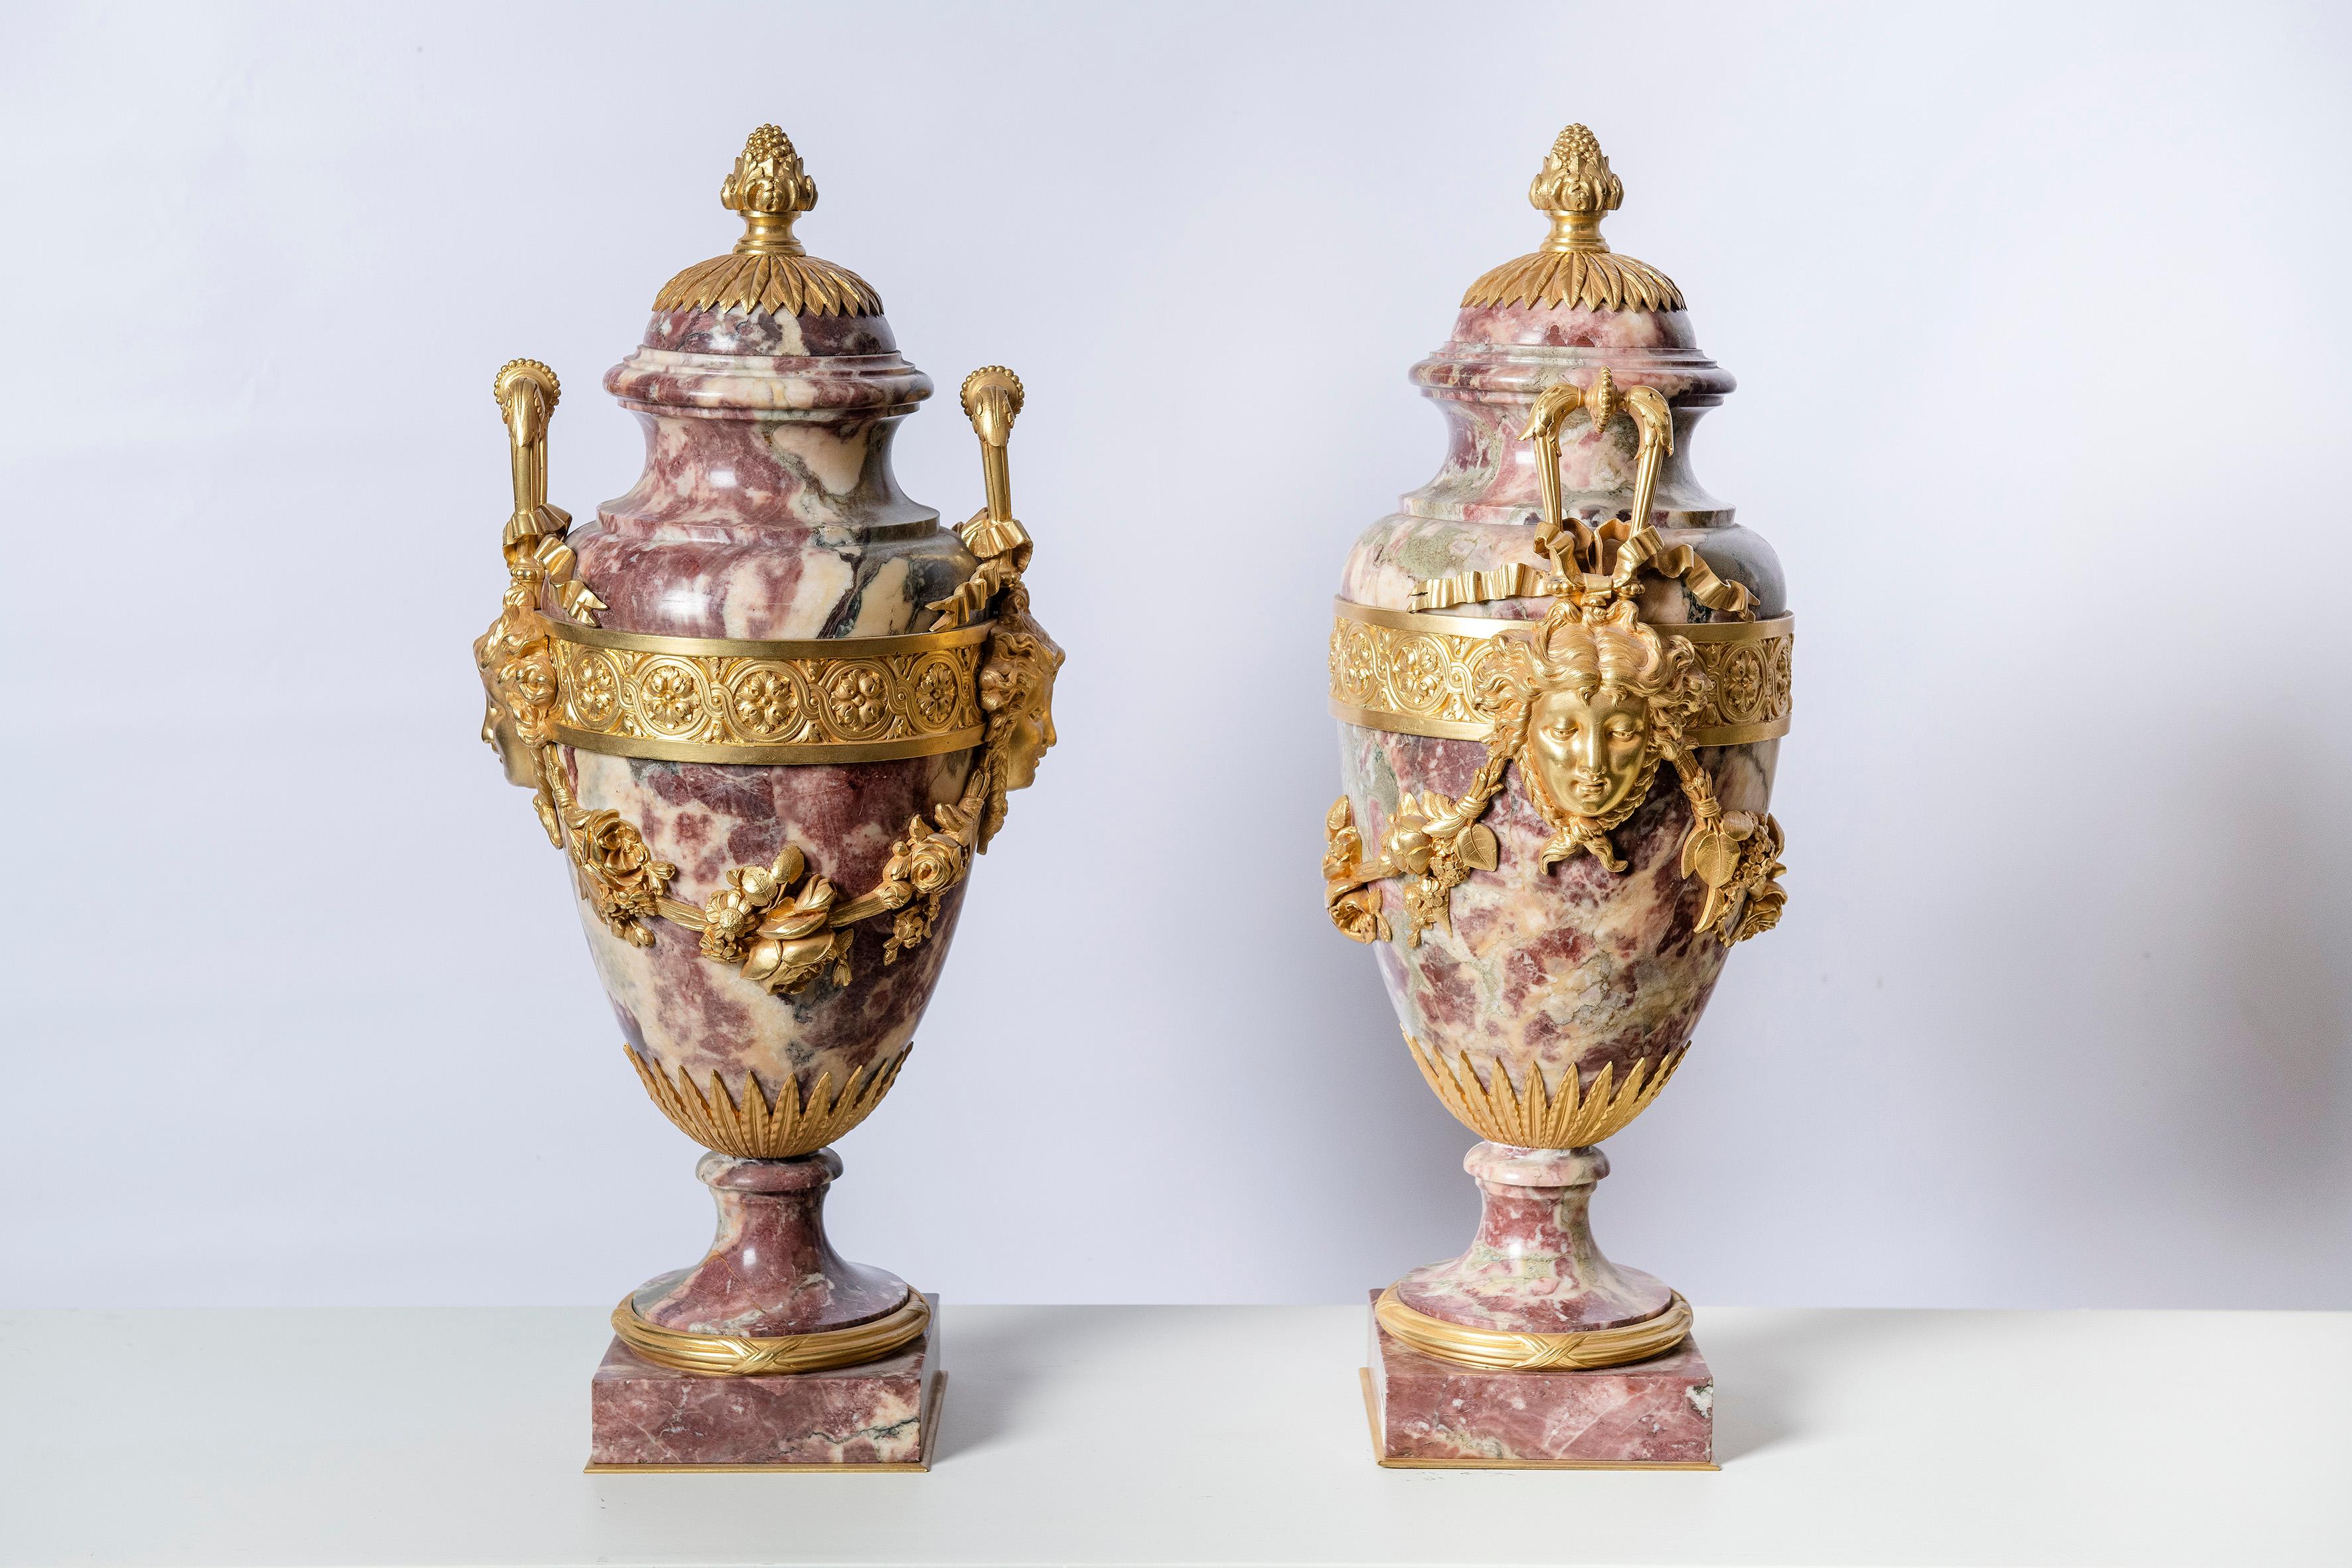 Pair of breccia marble and gilt bronze cassolettes, France, mid-19th century.